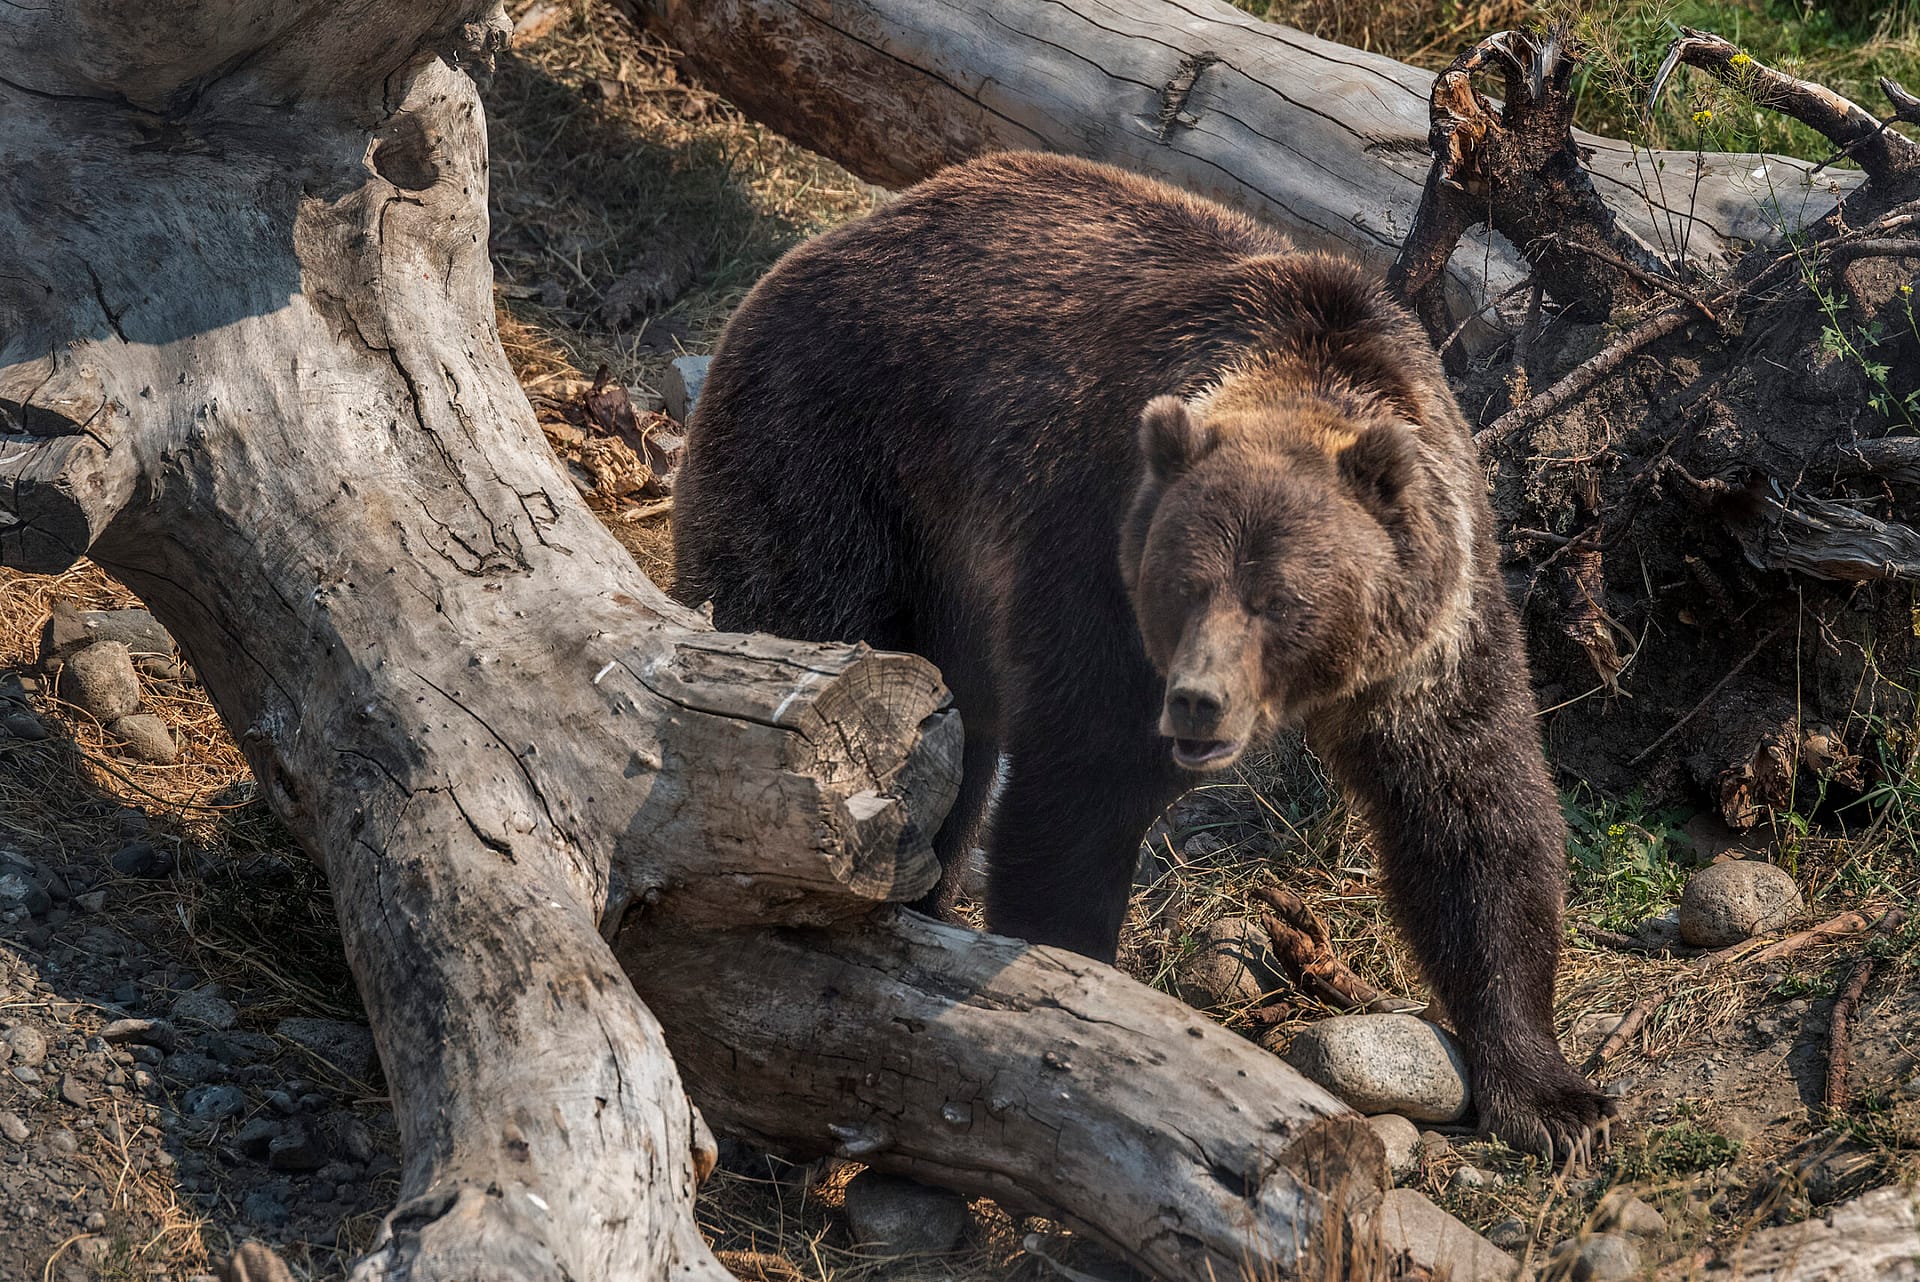 Grizzly Bears & the Endangered Species Act - Yellowstone National